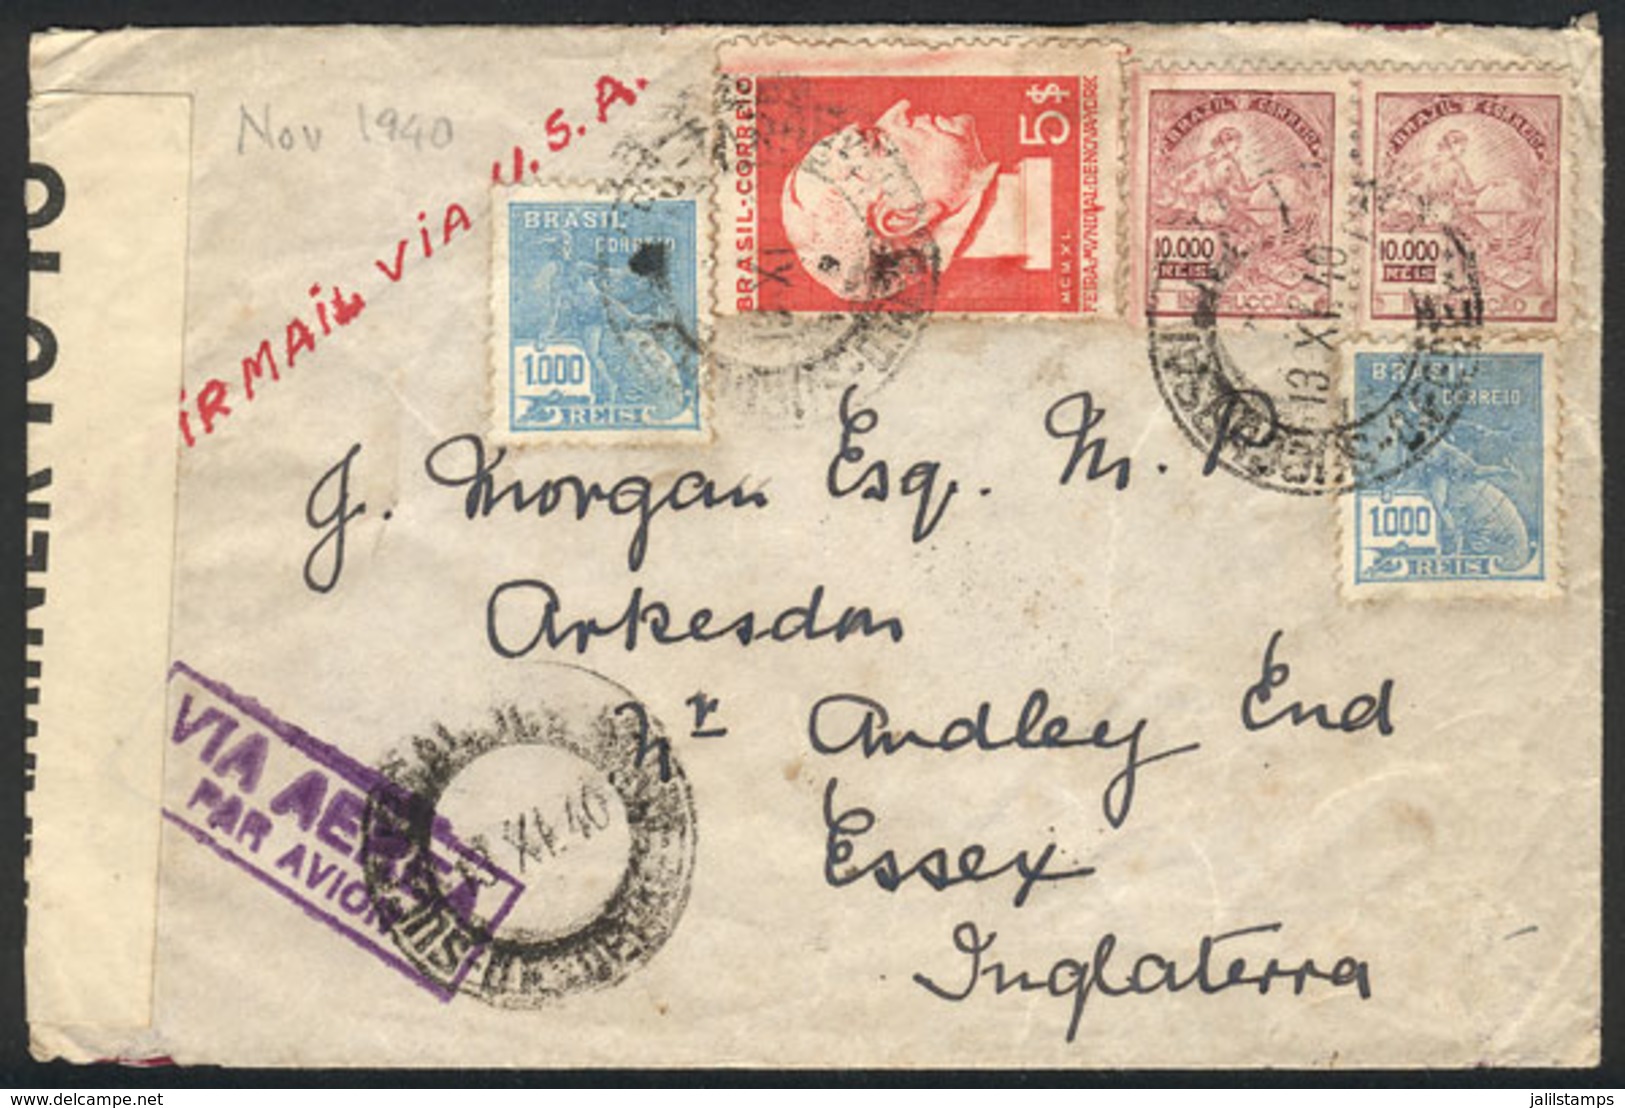 BRAZIL: Airmail Cover Sent From Rio To England On 13/NO/1940, Nice Postage! - Prephilately